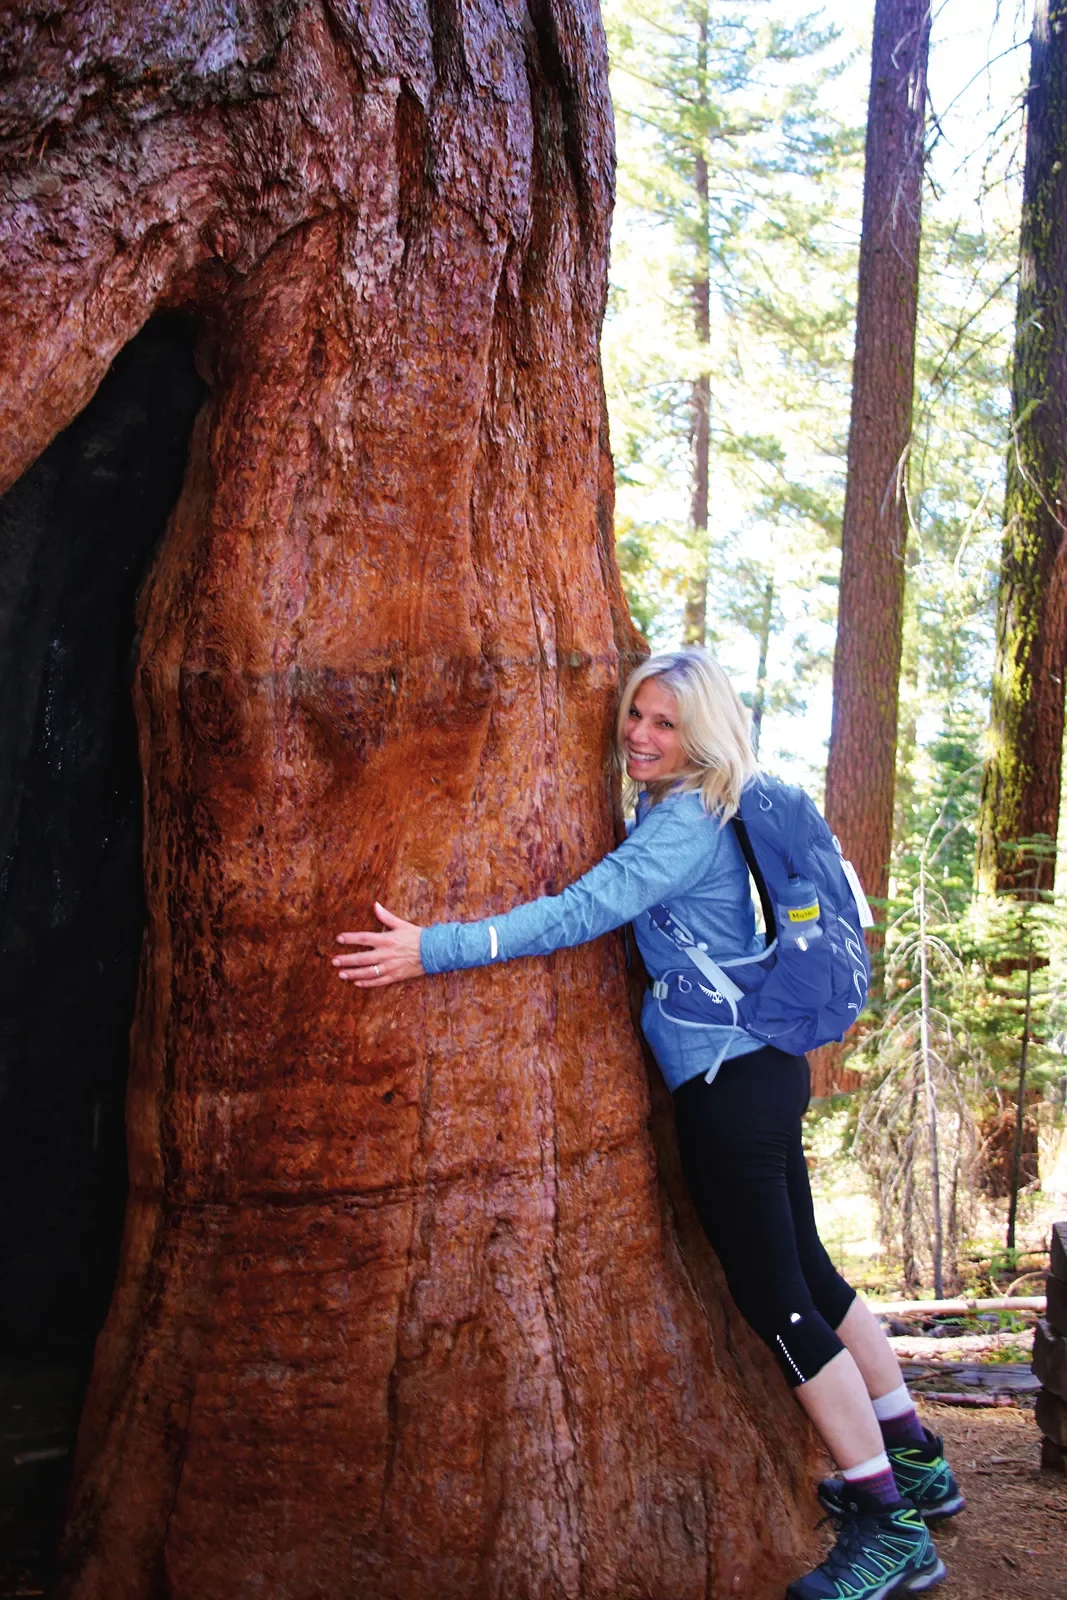 Guest hugging a large redwood tree.